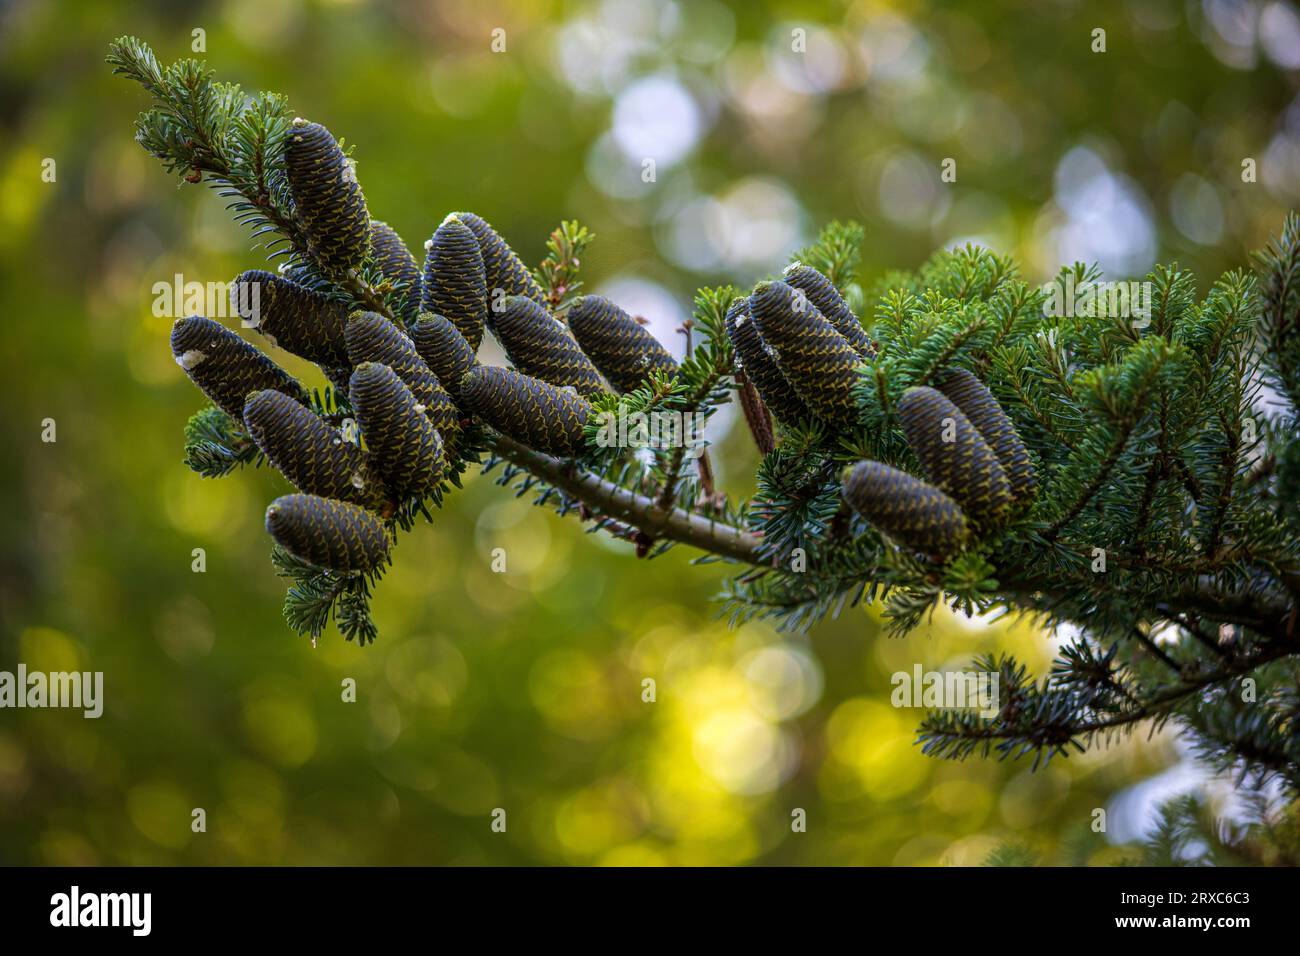 Tree branch with mature cones of Abies Koreana Korean Fir. Photography of lively nature. Stock Photo